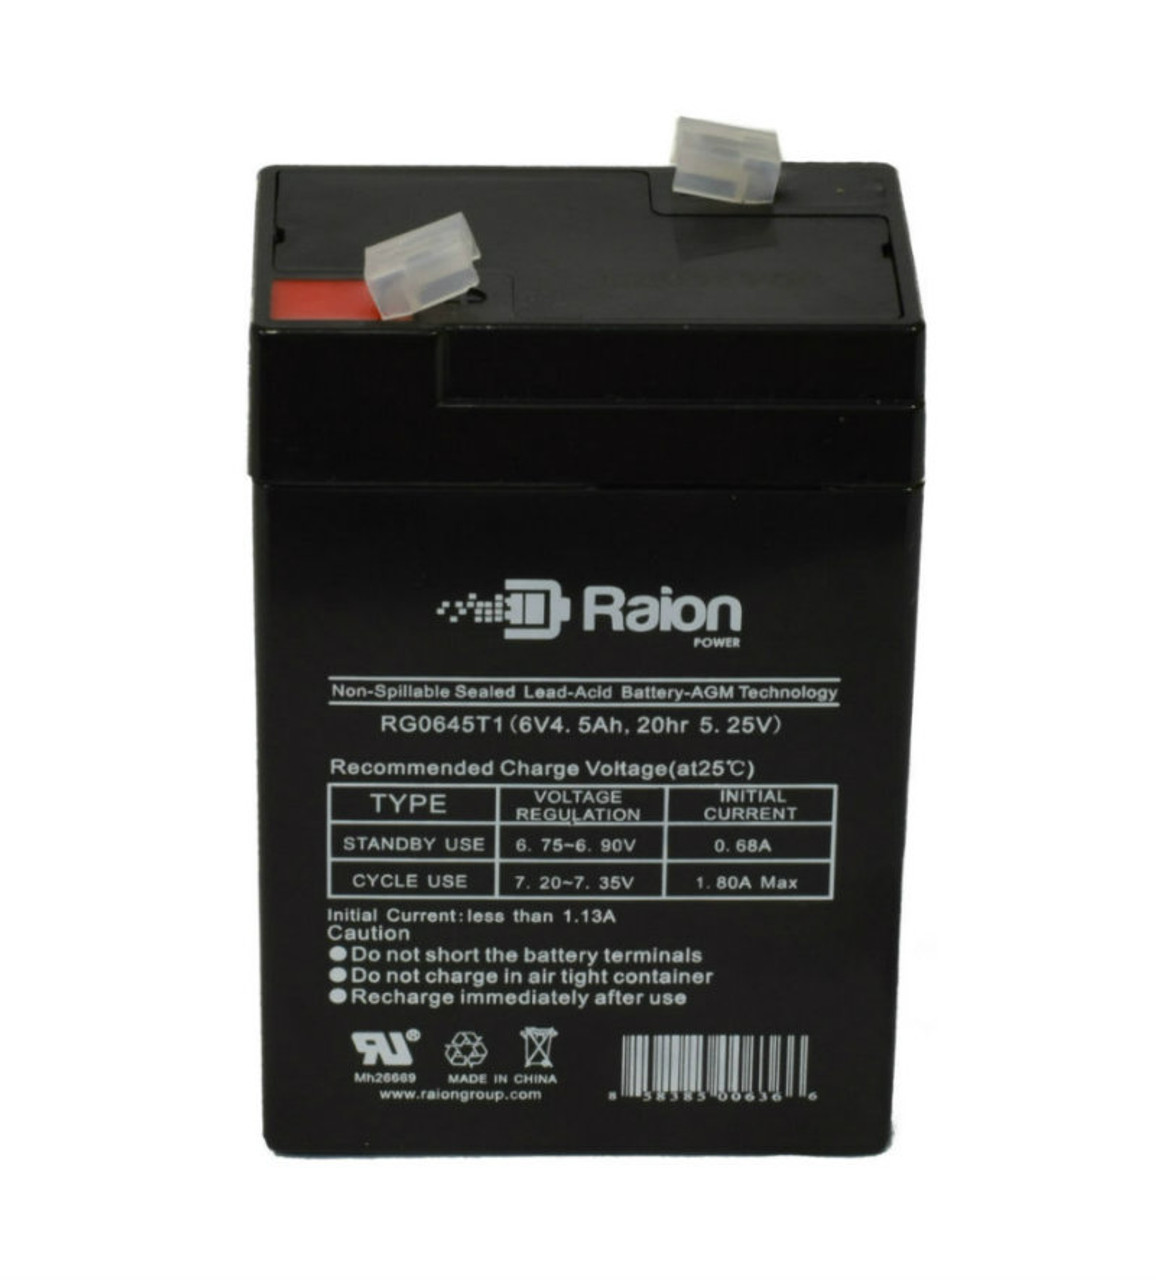 Raion Power RG0645T1 Replacement Battery Cartridge for Narada 3-FM-4.5